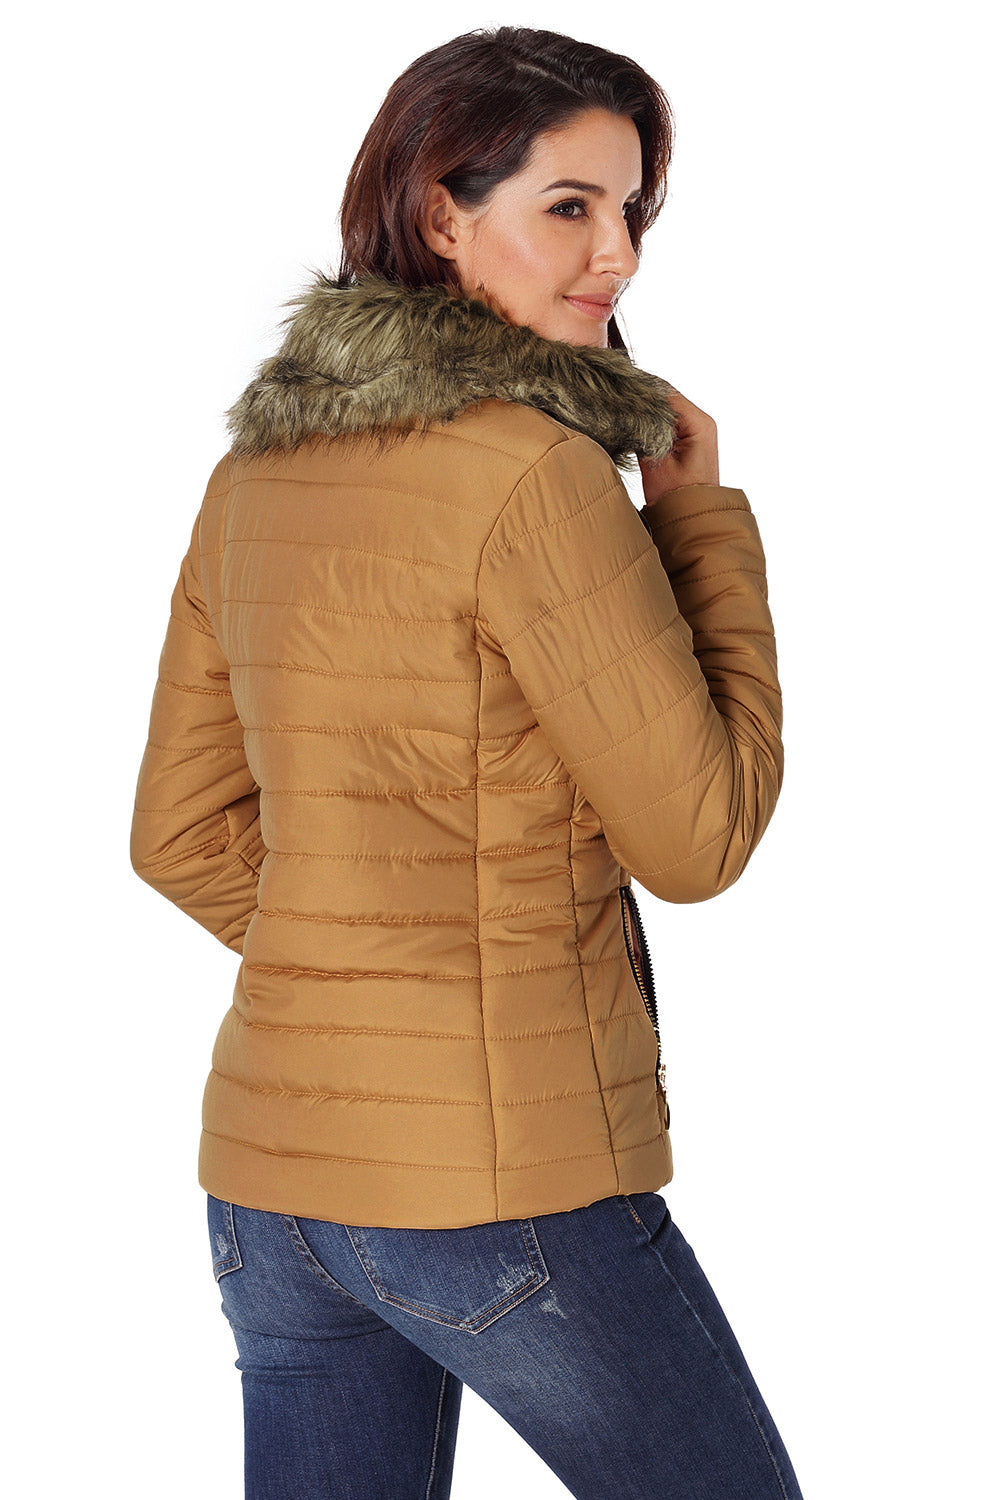 LC85117-17XXL, LC85117-17XL, LC85117-17L, LC85117-17M, LC85117-17S, Almond Brown Winter Coats for Women Camel Faux Fur Collar Trim Black Quilted Jacket Outerwear